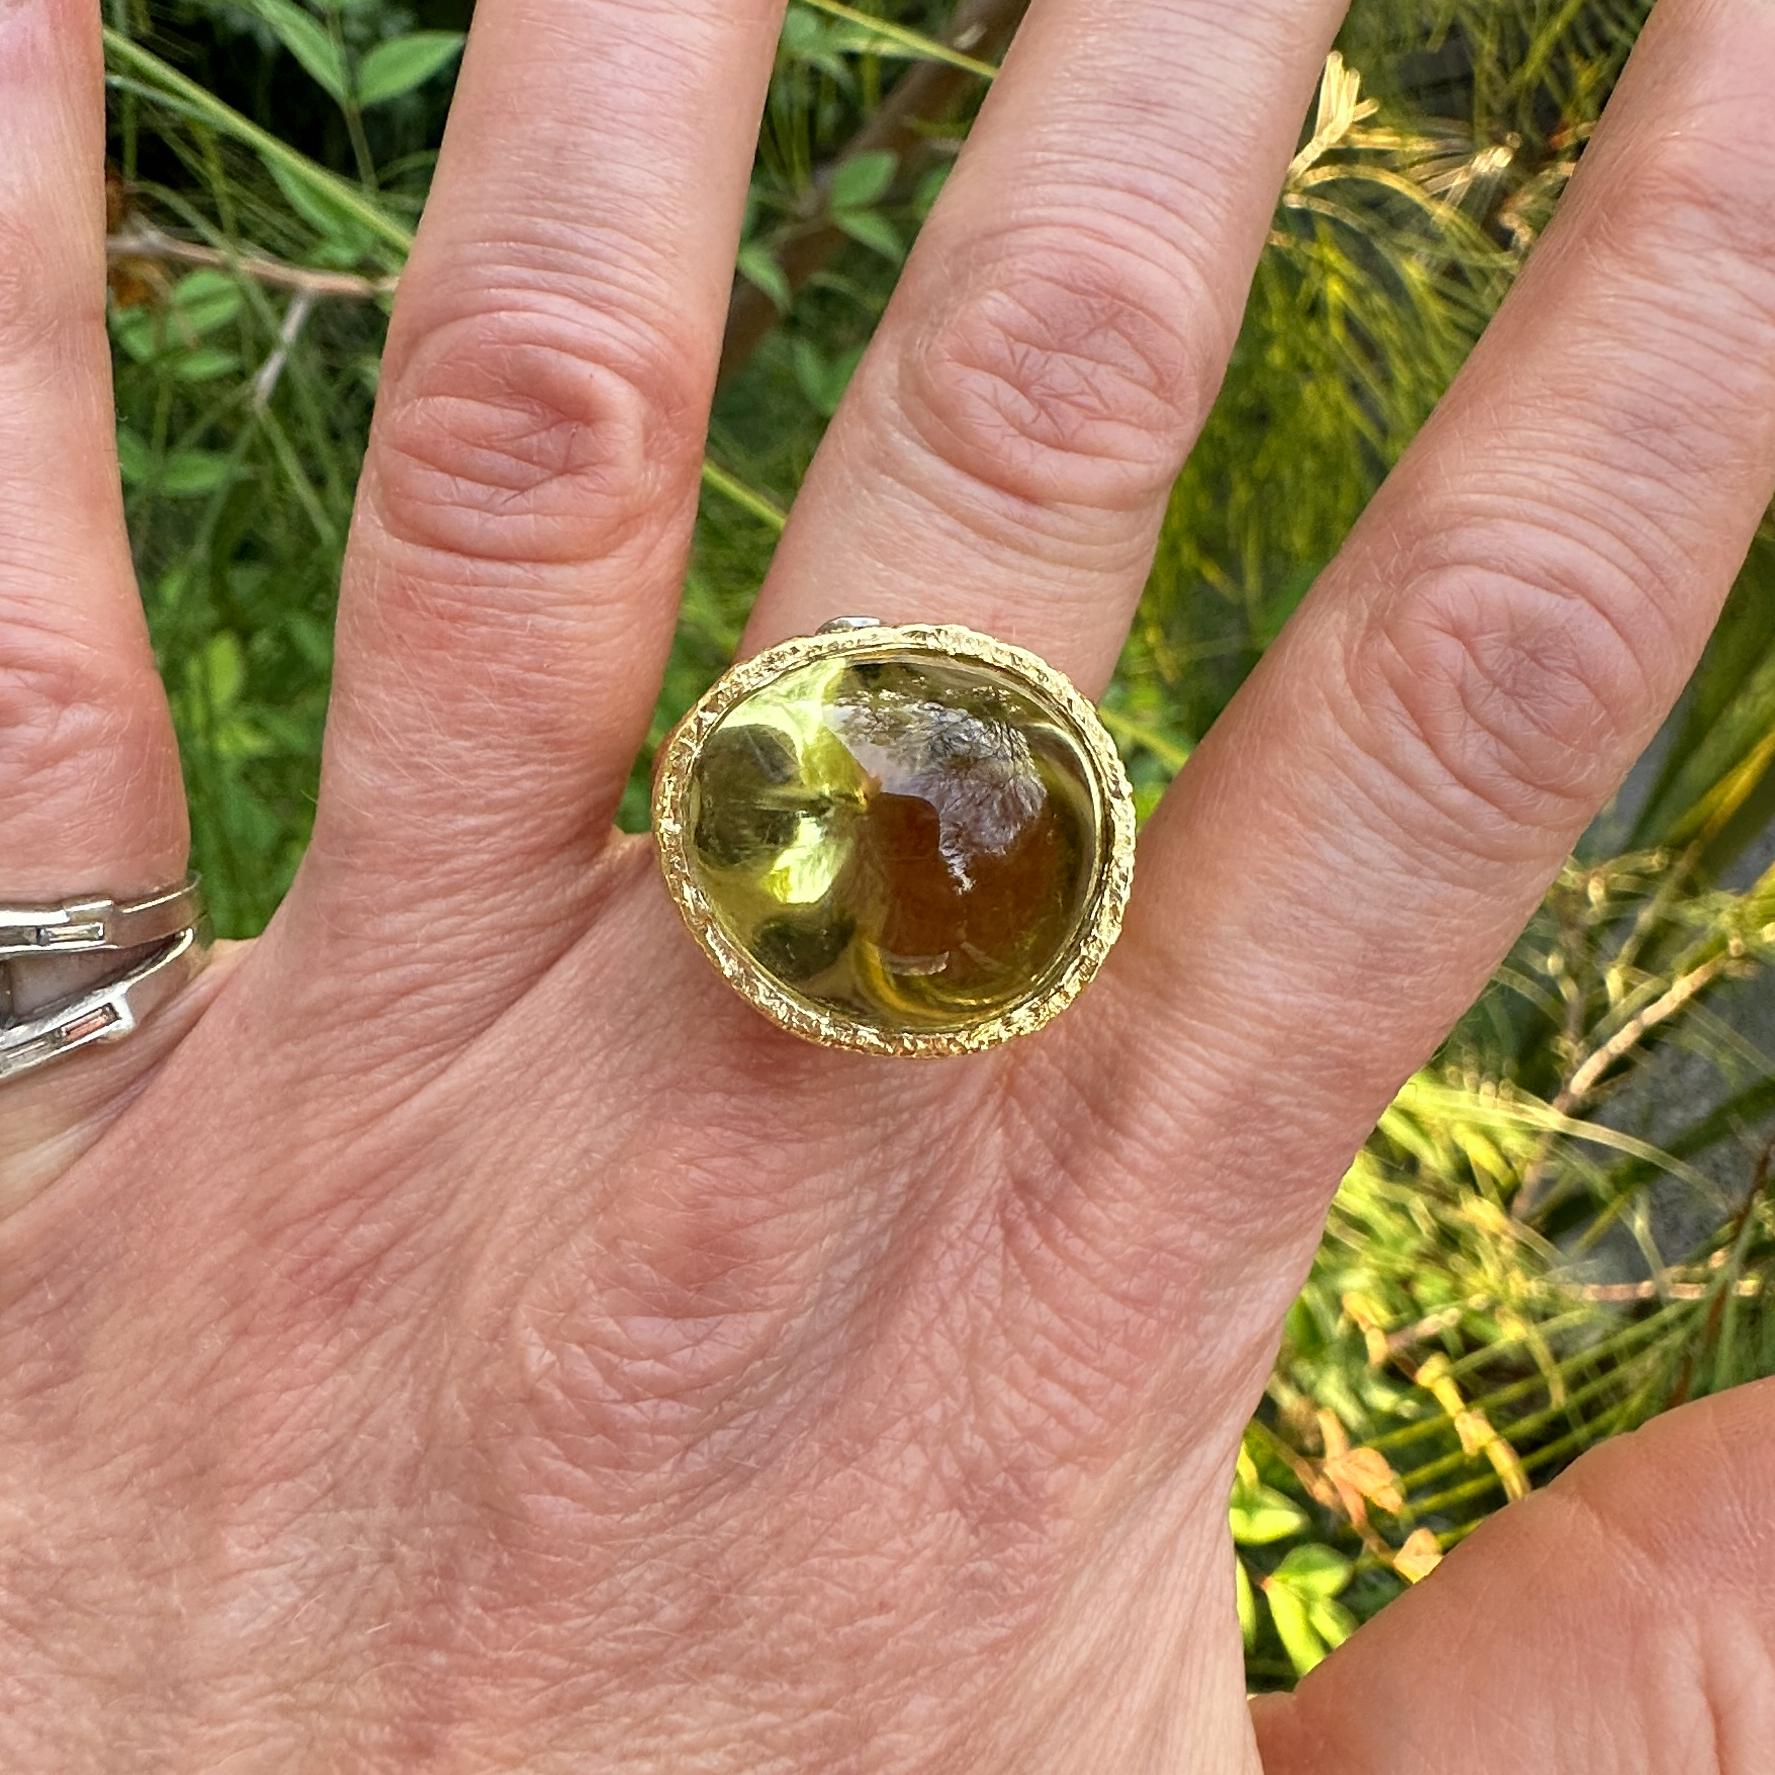 This freeform solitaire was designed and sculpted here in our shop by Eytan Brandes.  It's a one-of-a-kind piece created specifically to show off a huge, roughly egg-shaped lemon citrine cabochon.  The stone is wrapped in a high-elevation 18K yellow